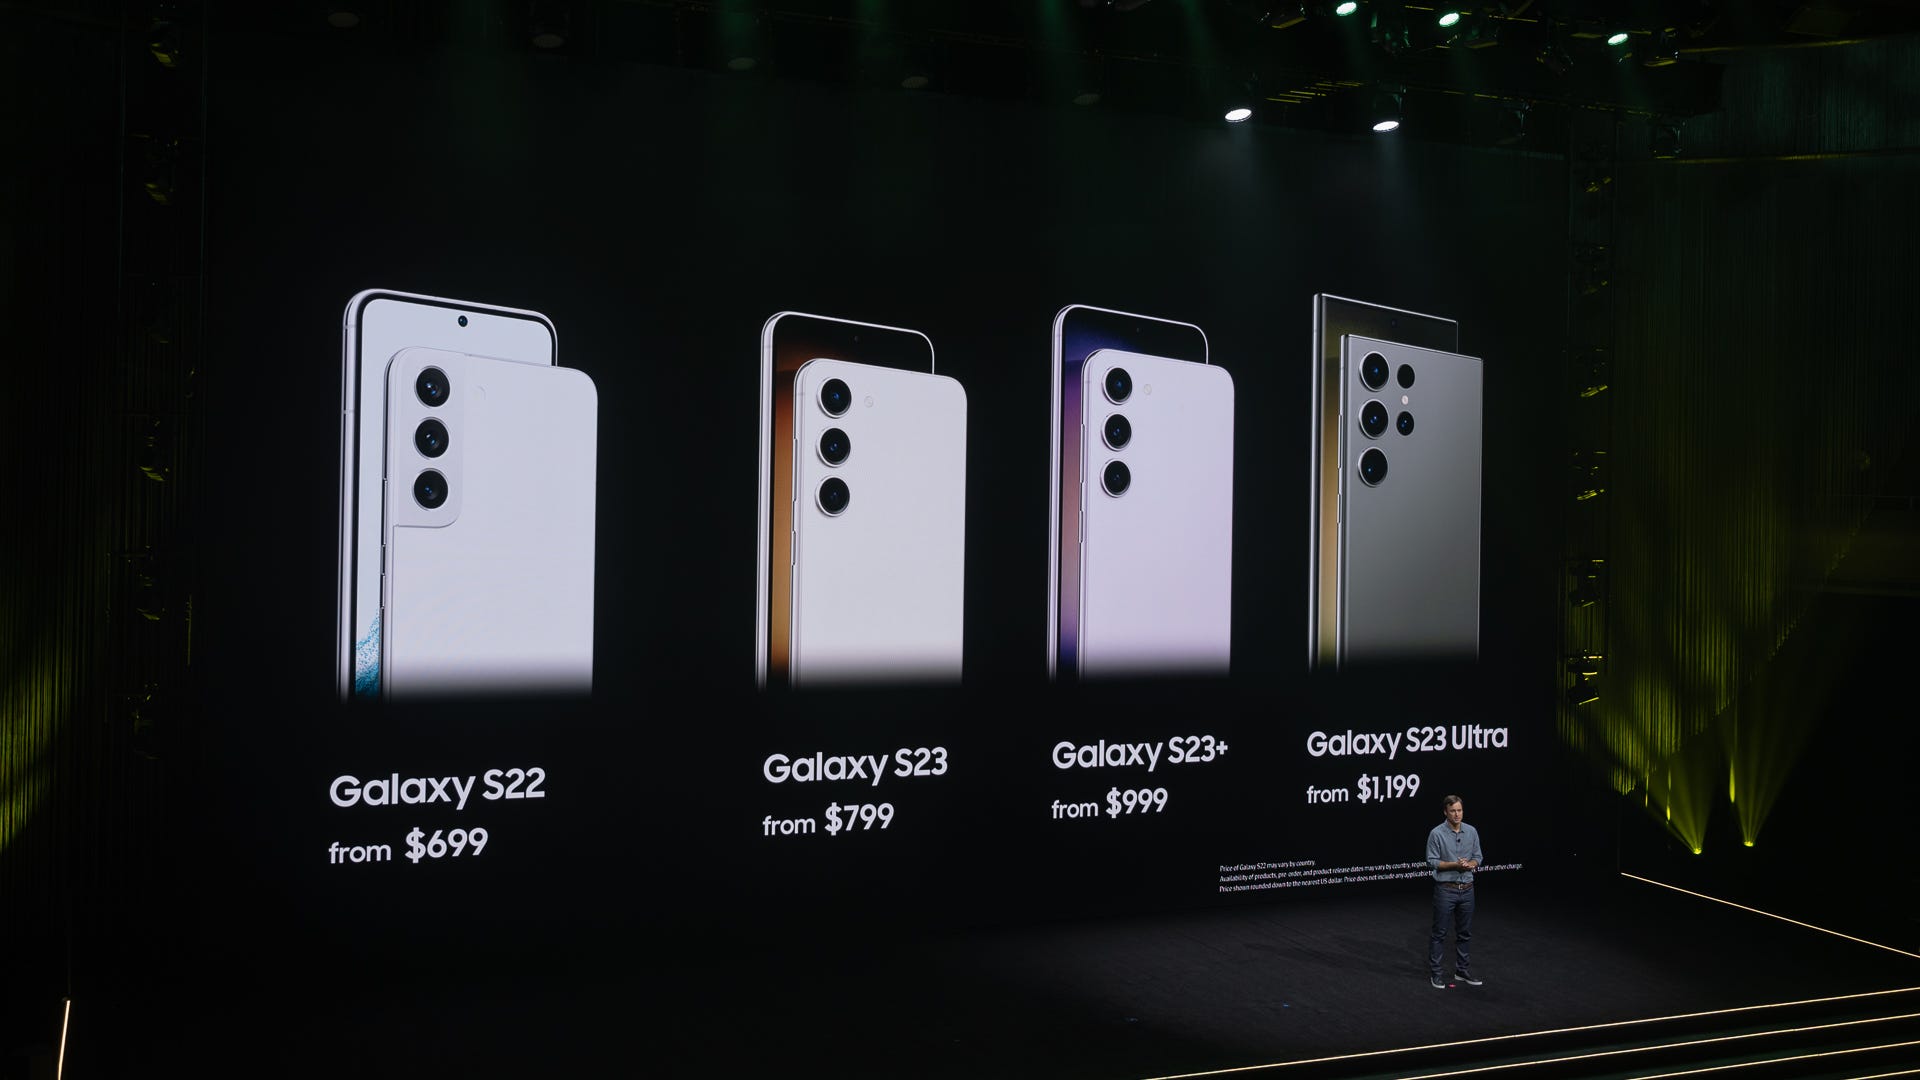 Samsung Galaxy S22, S23, S23 Plus, and S23 Ultra pricing being presented at Galaxy Unpacked 2023